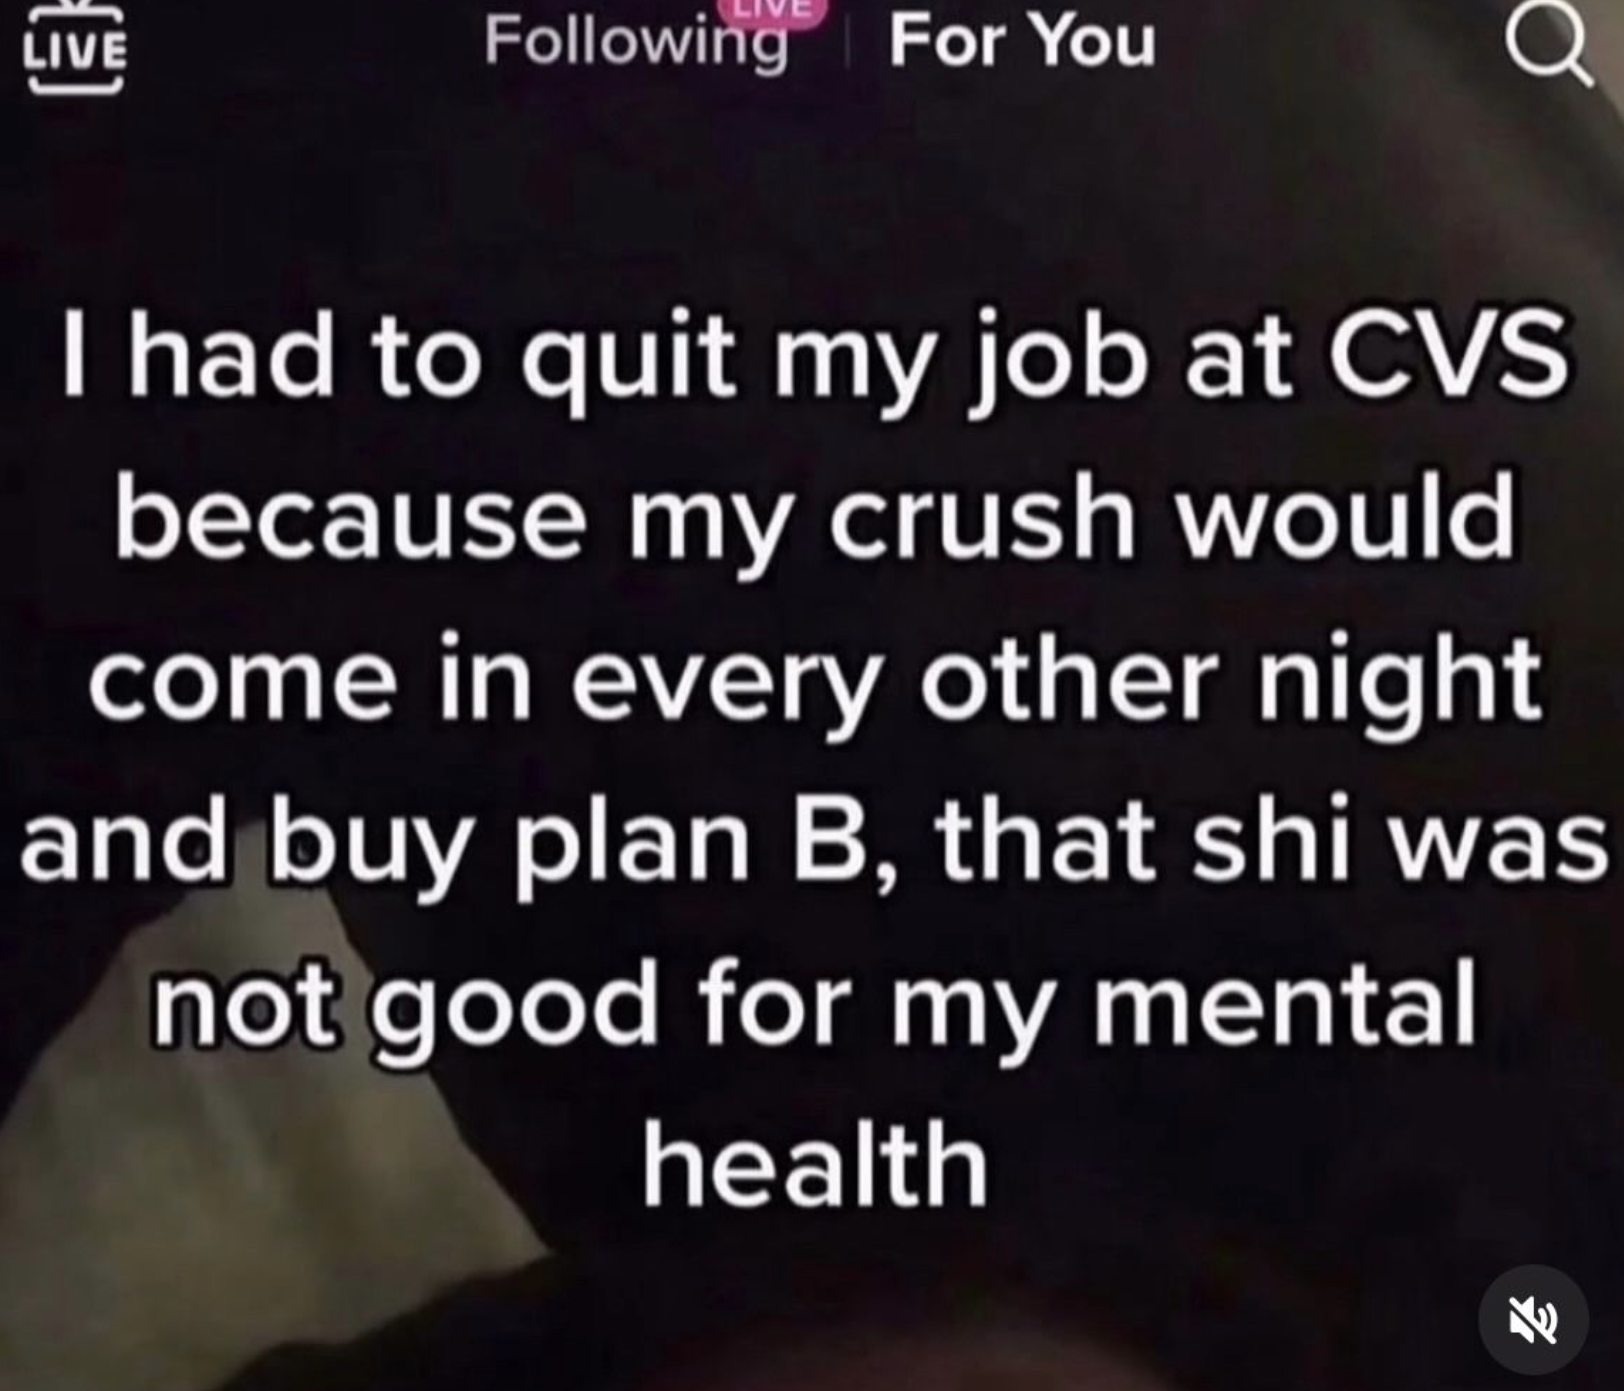 screenshot - { Live ing For You I had to quit my job at Cvs because my crush would come in every other night and buy plan B, that shi was not good for my mental health